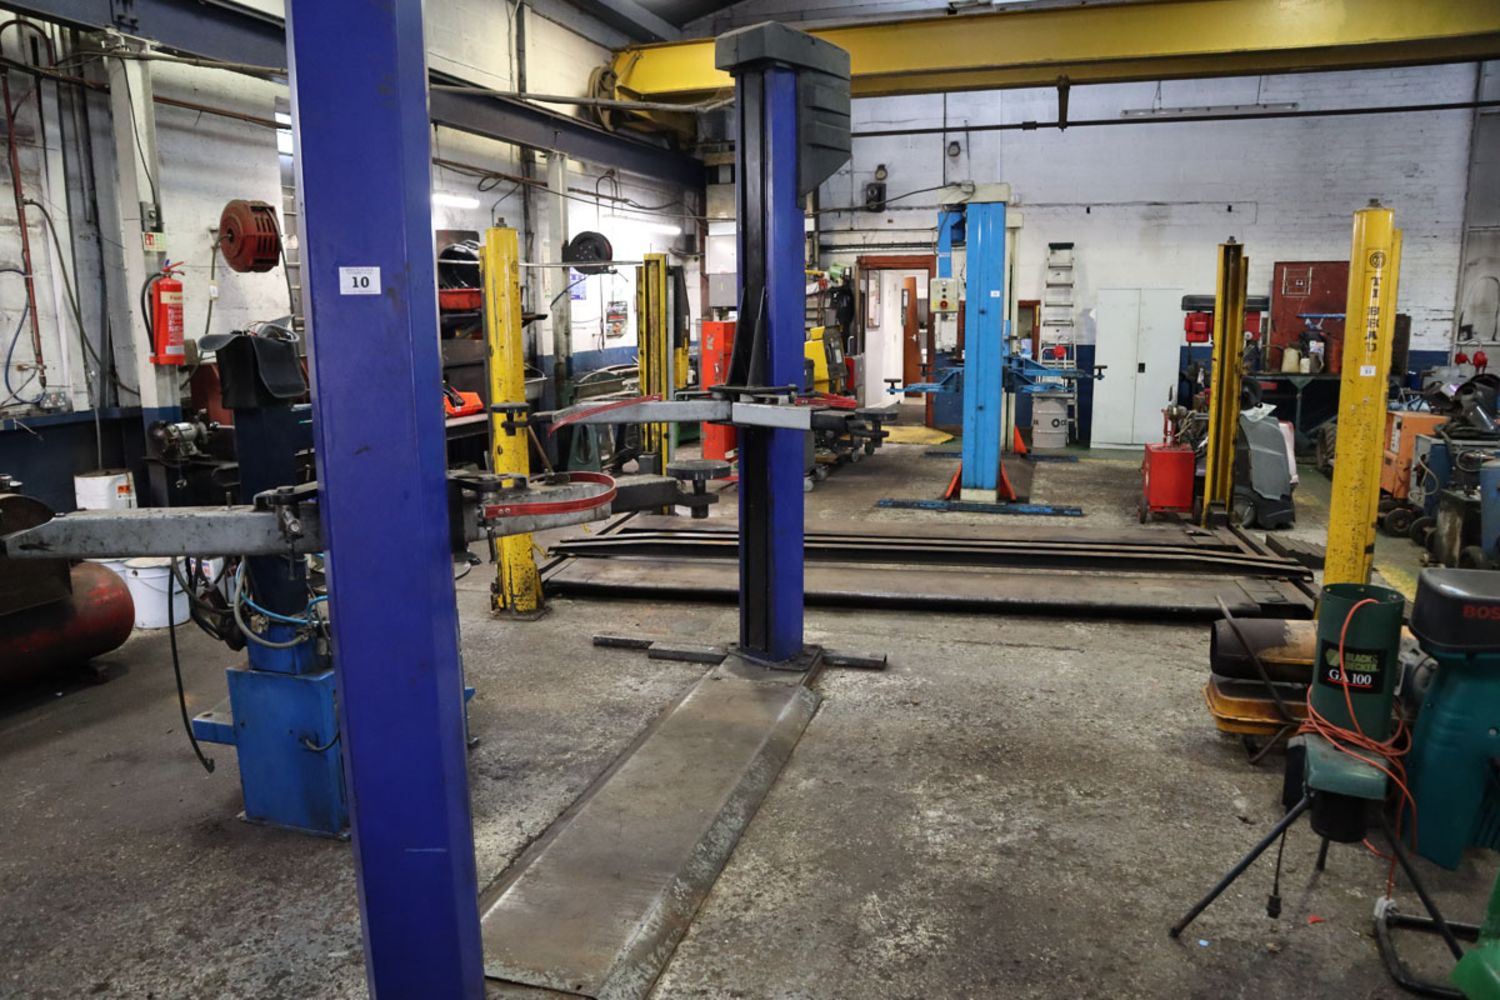 Vehicle Lifts, Garage Equipment and Tools, Workshop Items & Vehicles